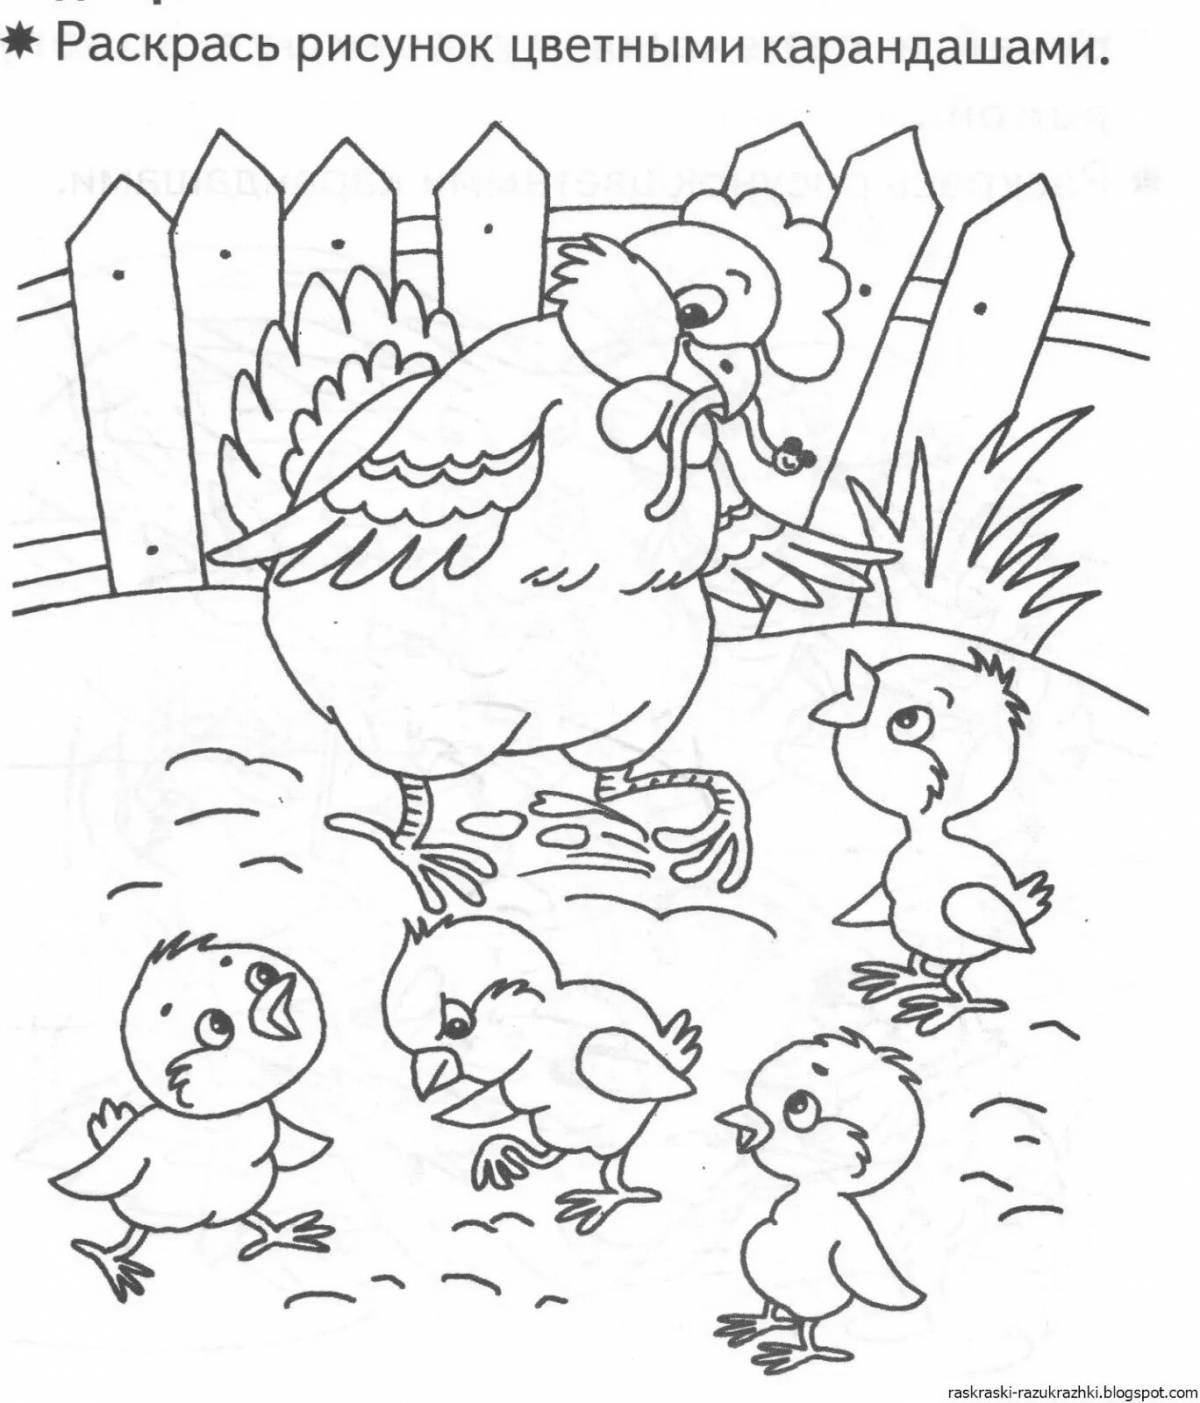 Creative bird coloring book for 6-7 year olds